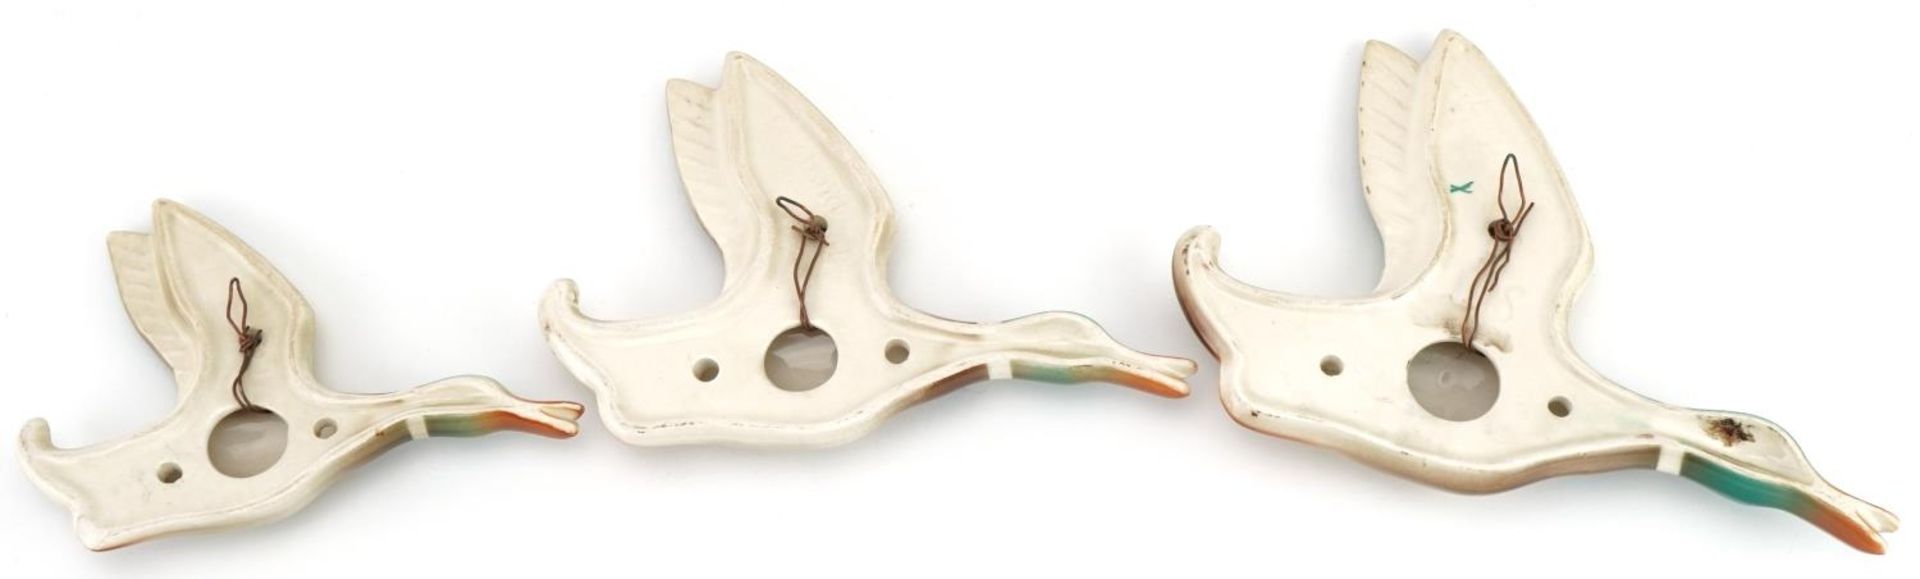 Graduated set of three Beswick style Mallard wall plaques, the largest 18.5cm in length : For - Image 2 of 3